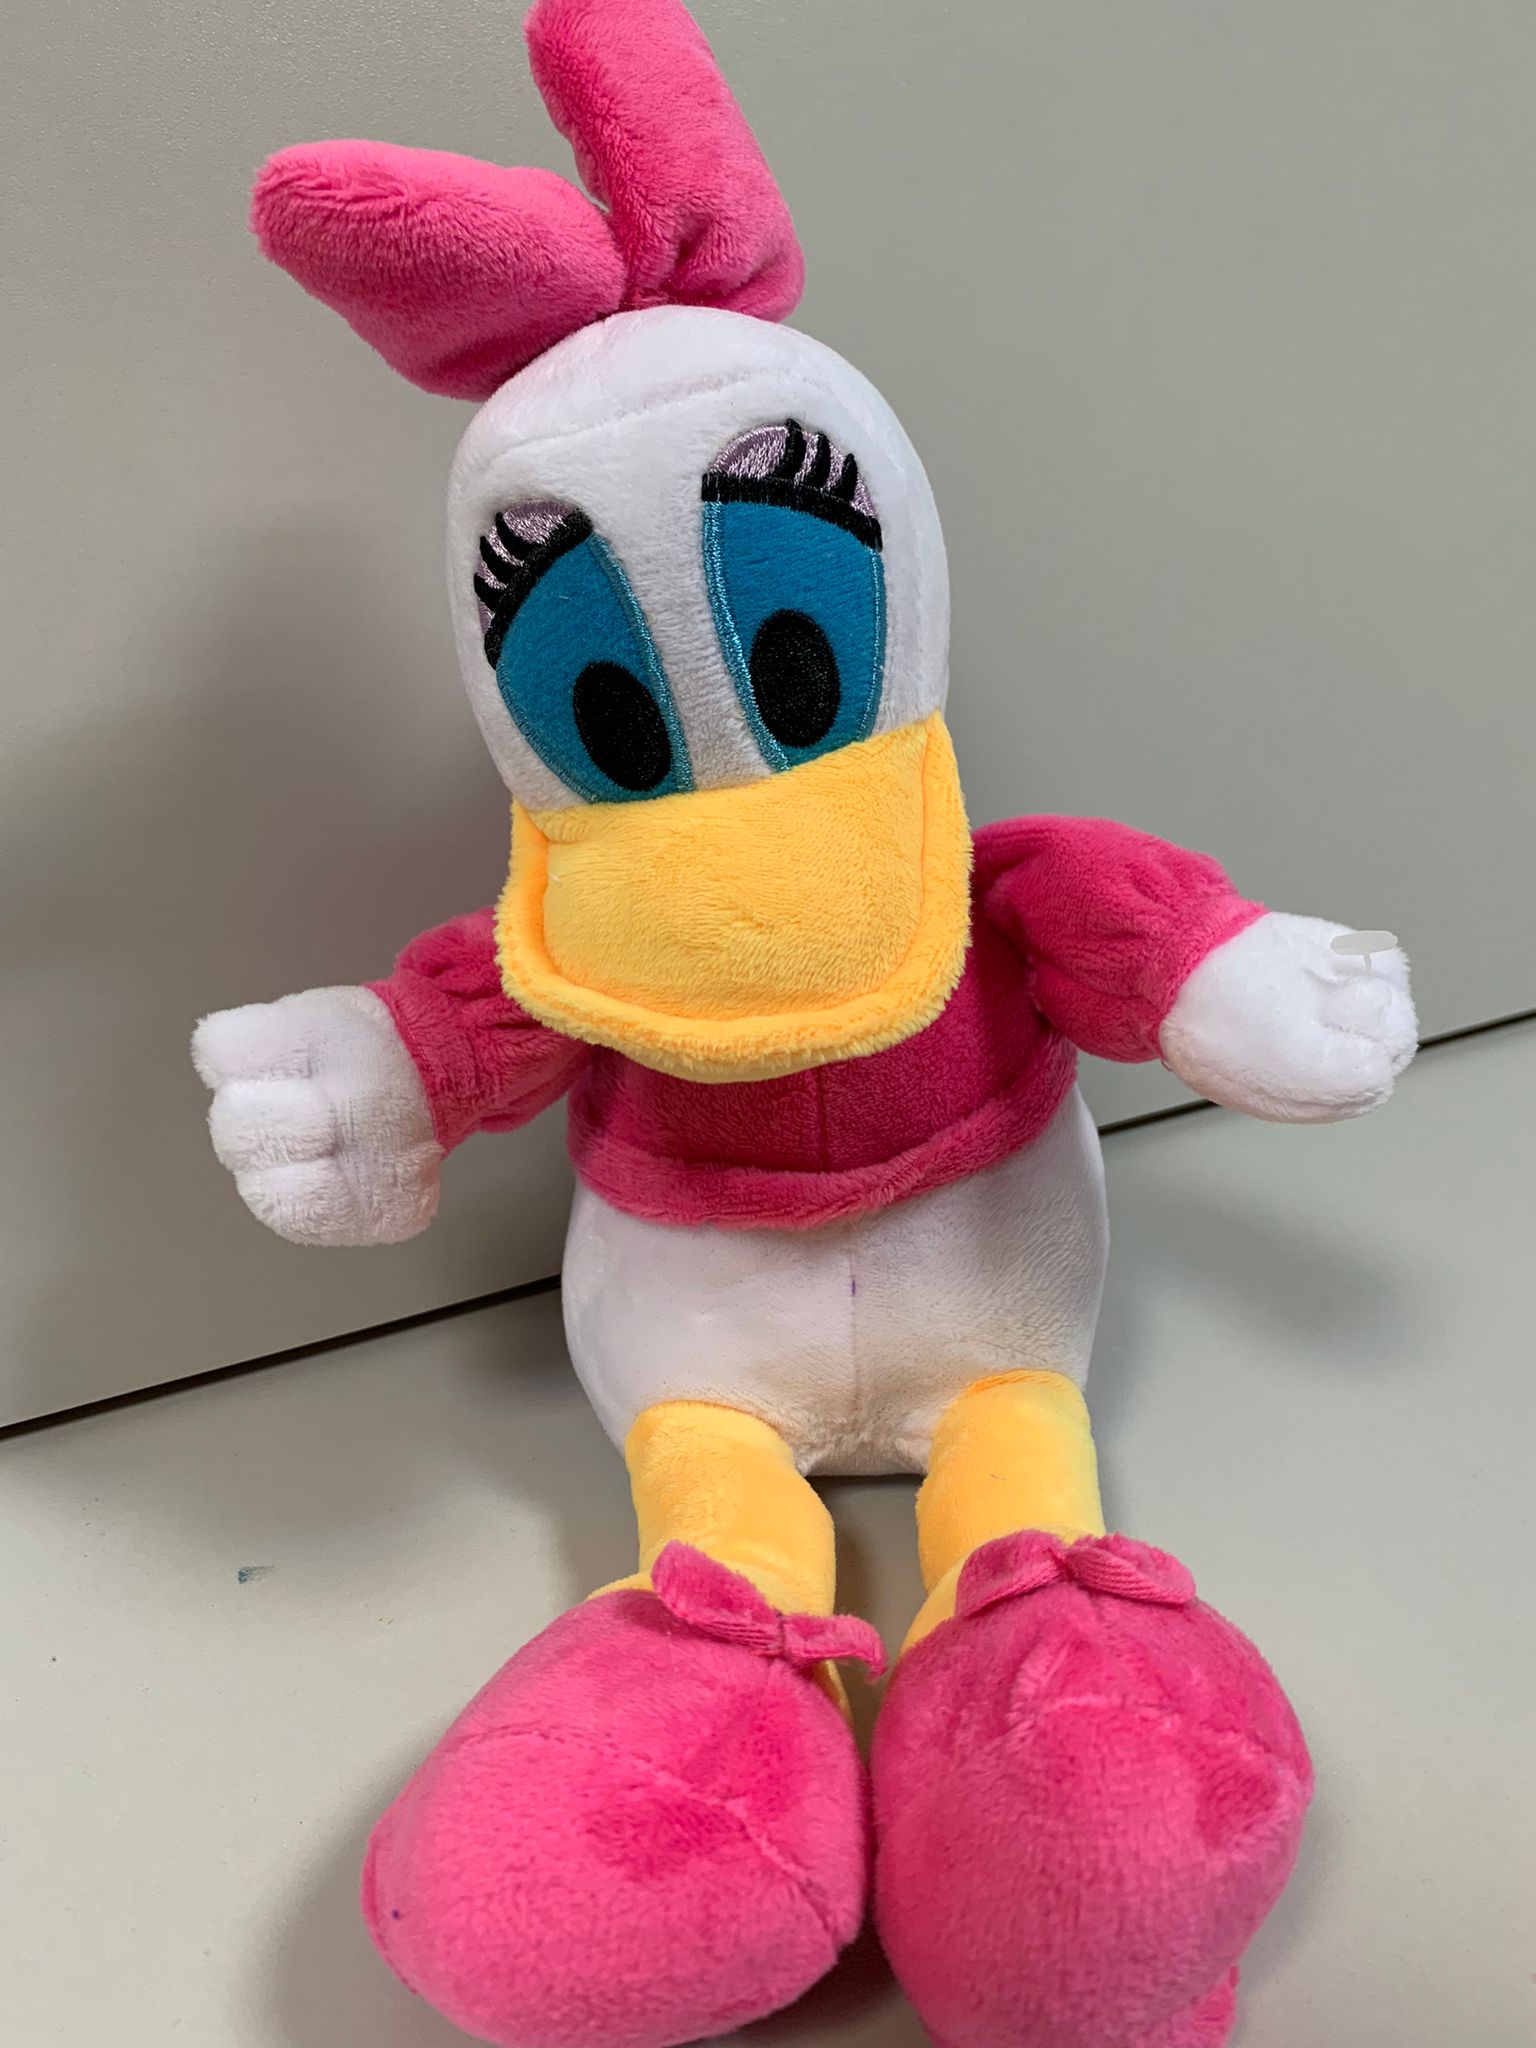 Plush character Daisy from Donald the duck, pink